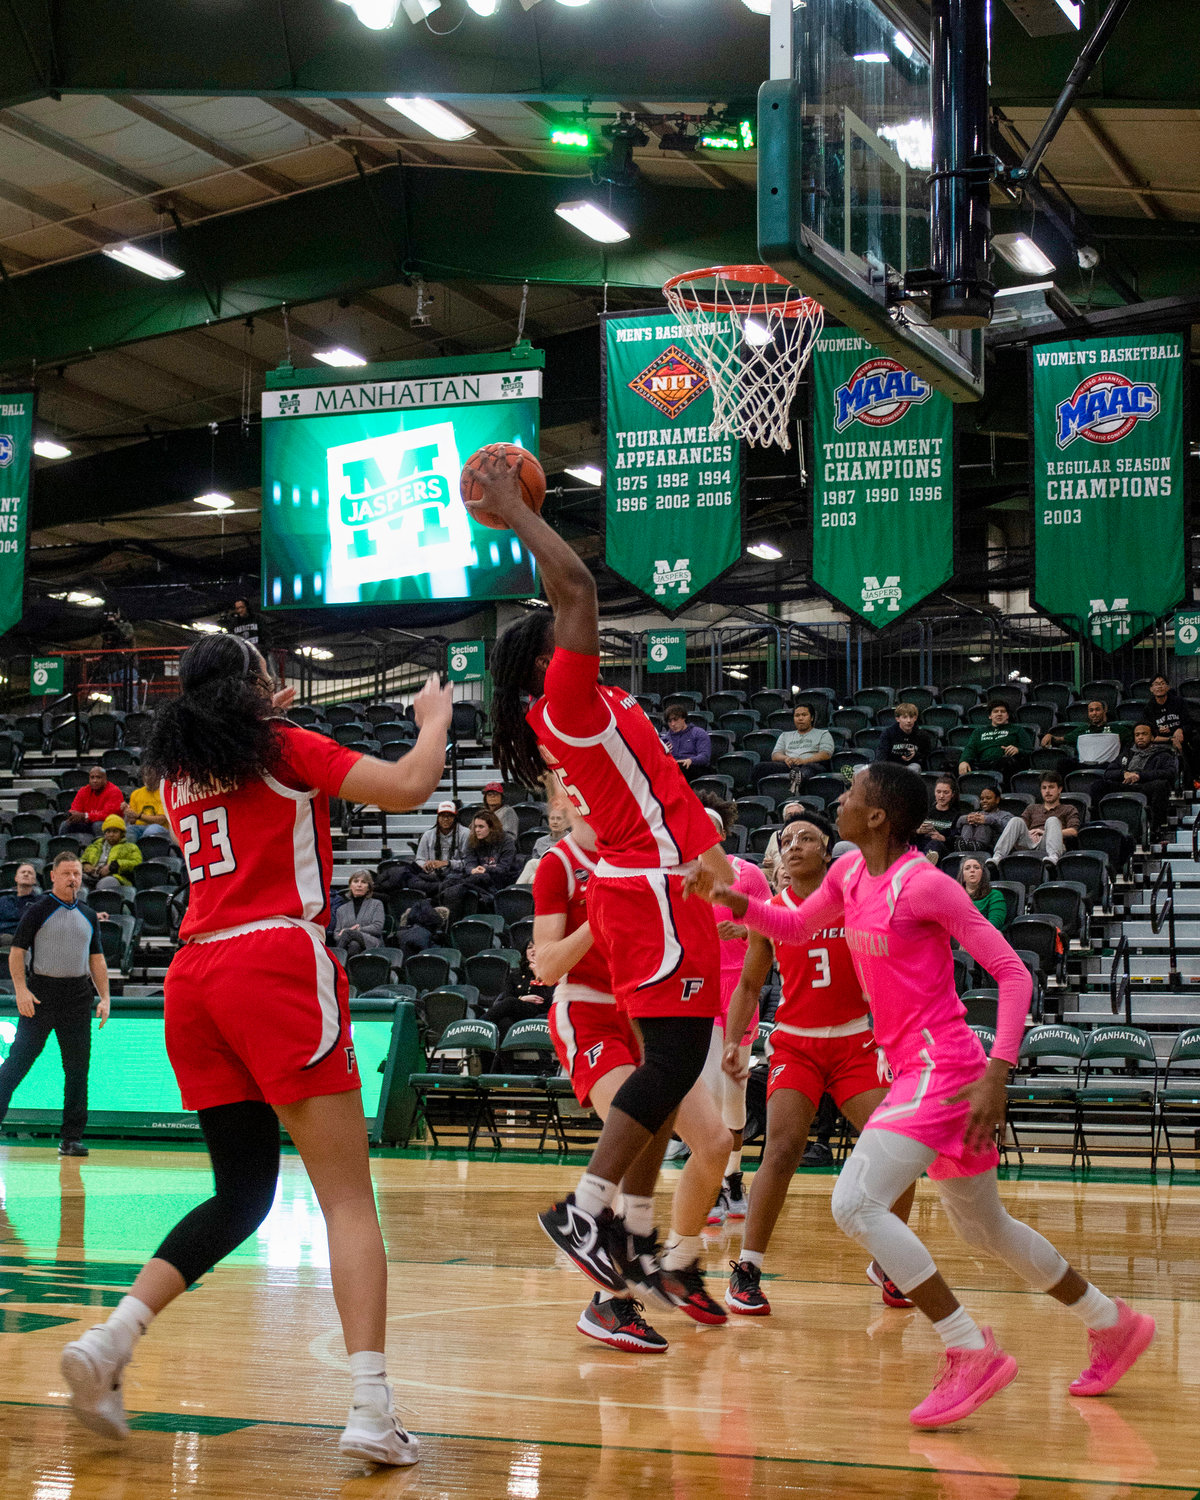 The Jaspers were out of their customary green and white uniforms and donned pink in honor of National Girls & Women in Sports Day, which was Feb. 1. On Feb. 2, Jasper guard Dee Dee Davis watches as a Fairfield player tries to convert a rebound as Manhattan College defeated Fairfield University, 53-46, at Draddy Gymnasium. Bronx borough president was in the house to help the school celebrate the 50th anniversary of Title IX.